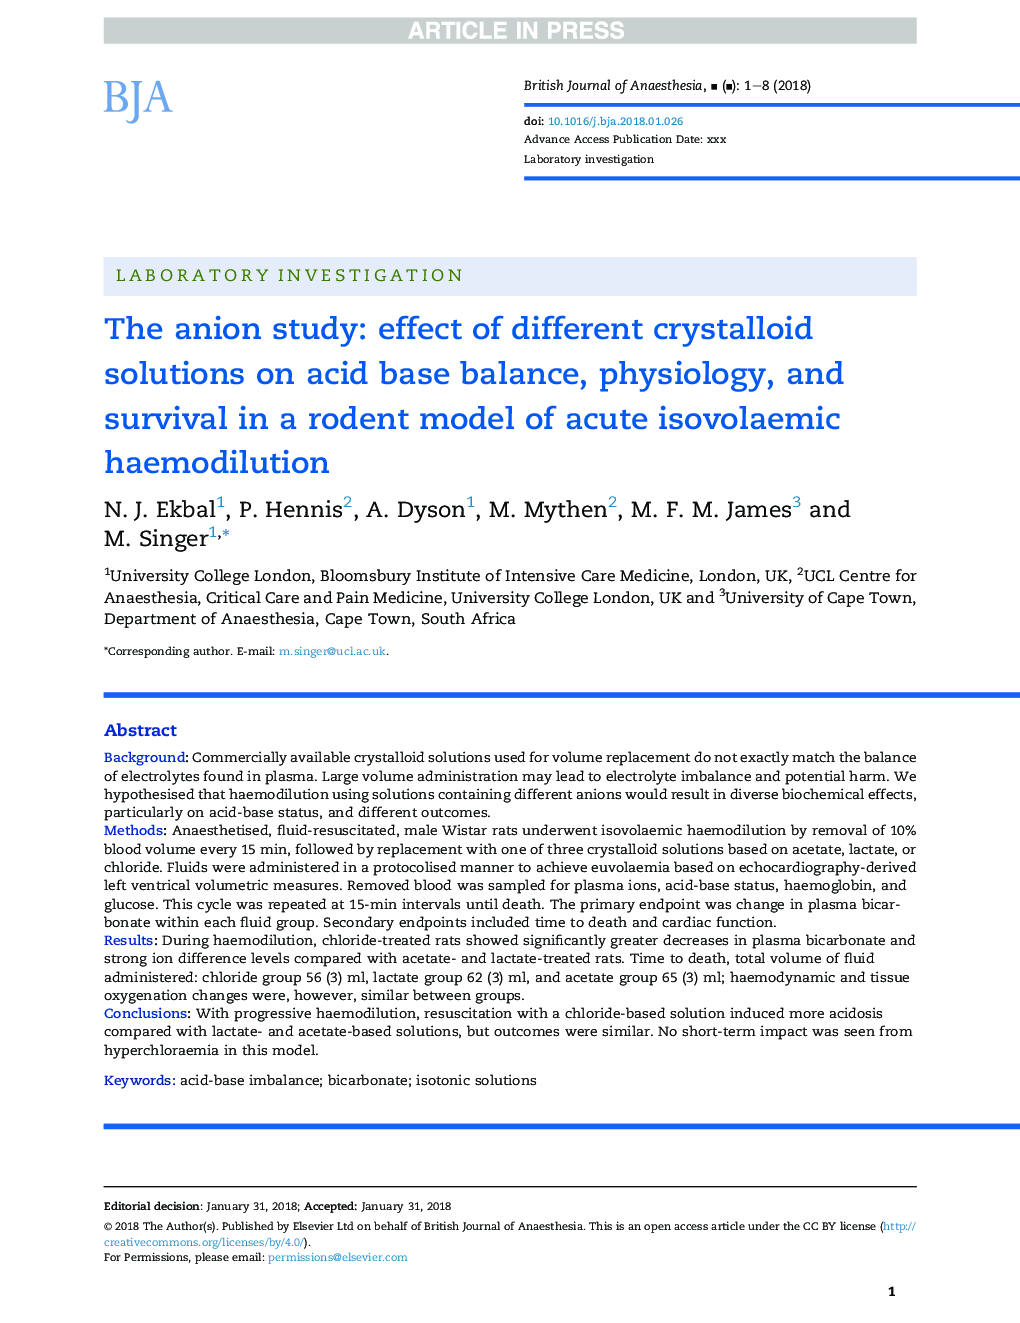 The anion study: effect of different crystalloid solutions on acid base balance, physiology, and survival in a rodent model of acute isovolaemic haemodilution